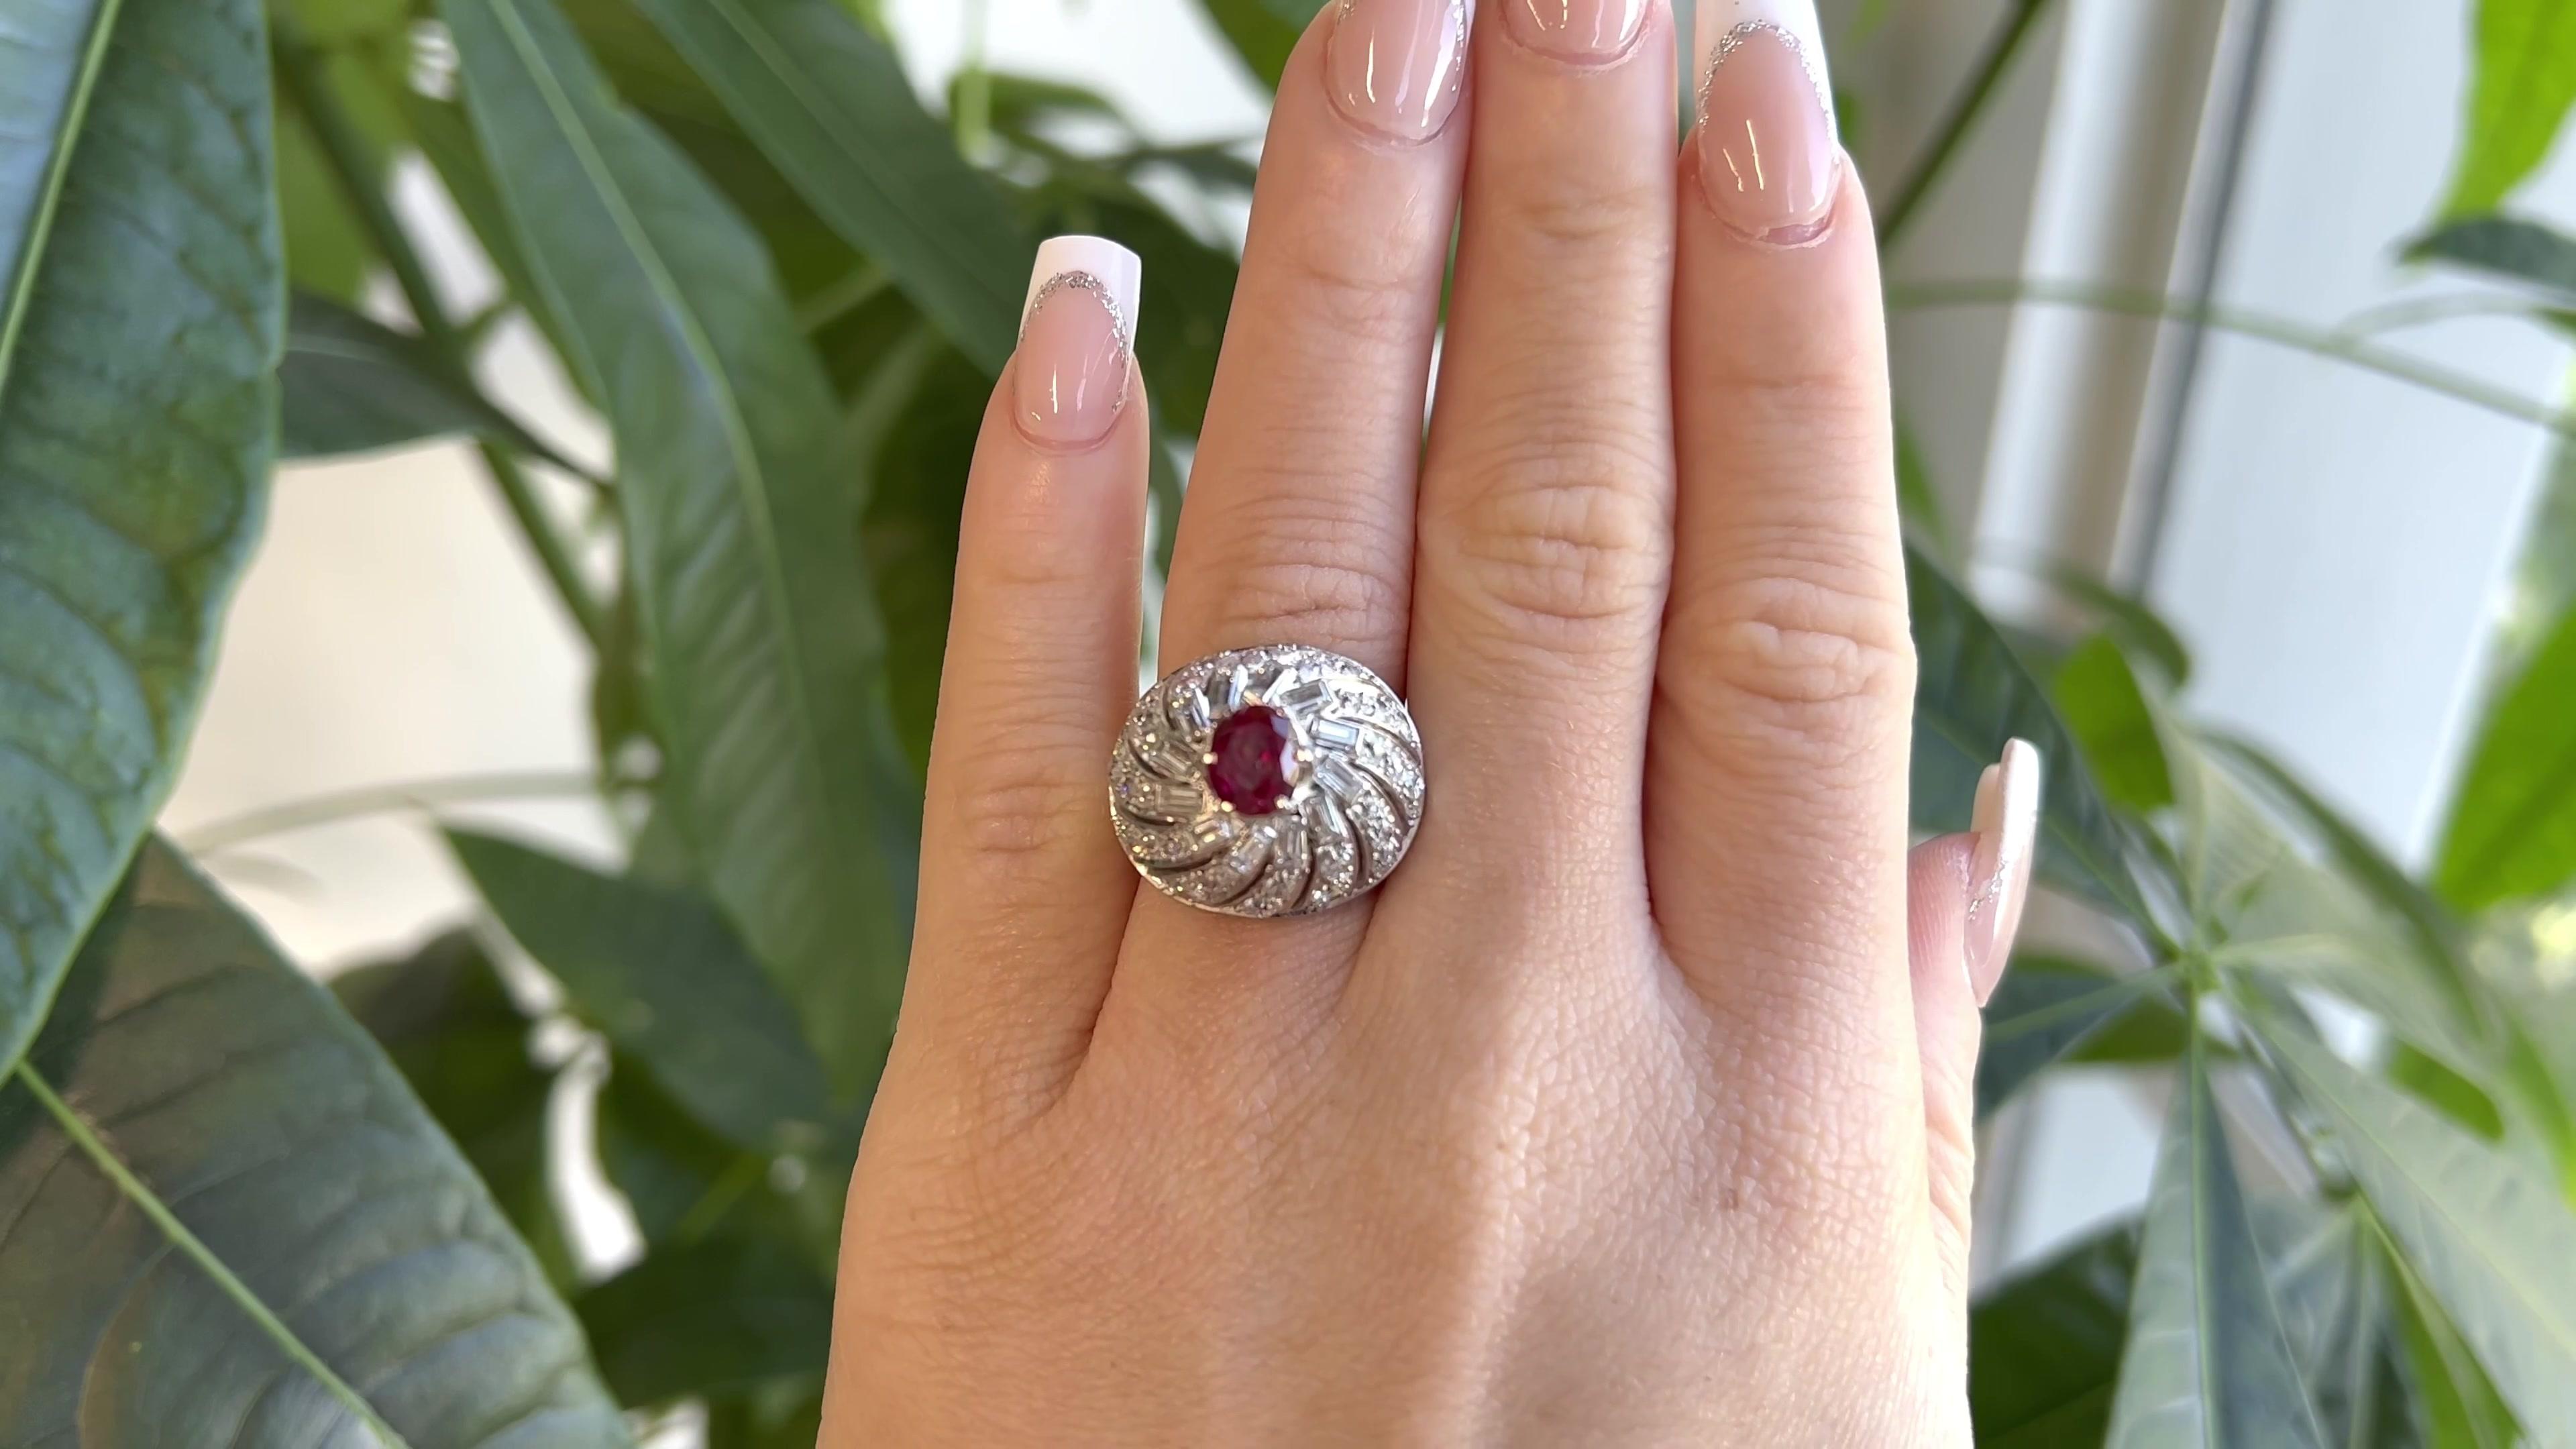 One Retro Ruby Diamond Platinum Dome Ring. Featuring one GRS certified 2.10 carat oval shaped ruby accompanied with certificate #2021-107052. Accented by 12 baguette cut diamonds with a total weight of approximately 1.35 carats, graded F color, VS